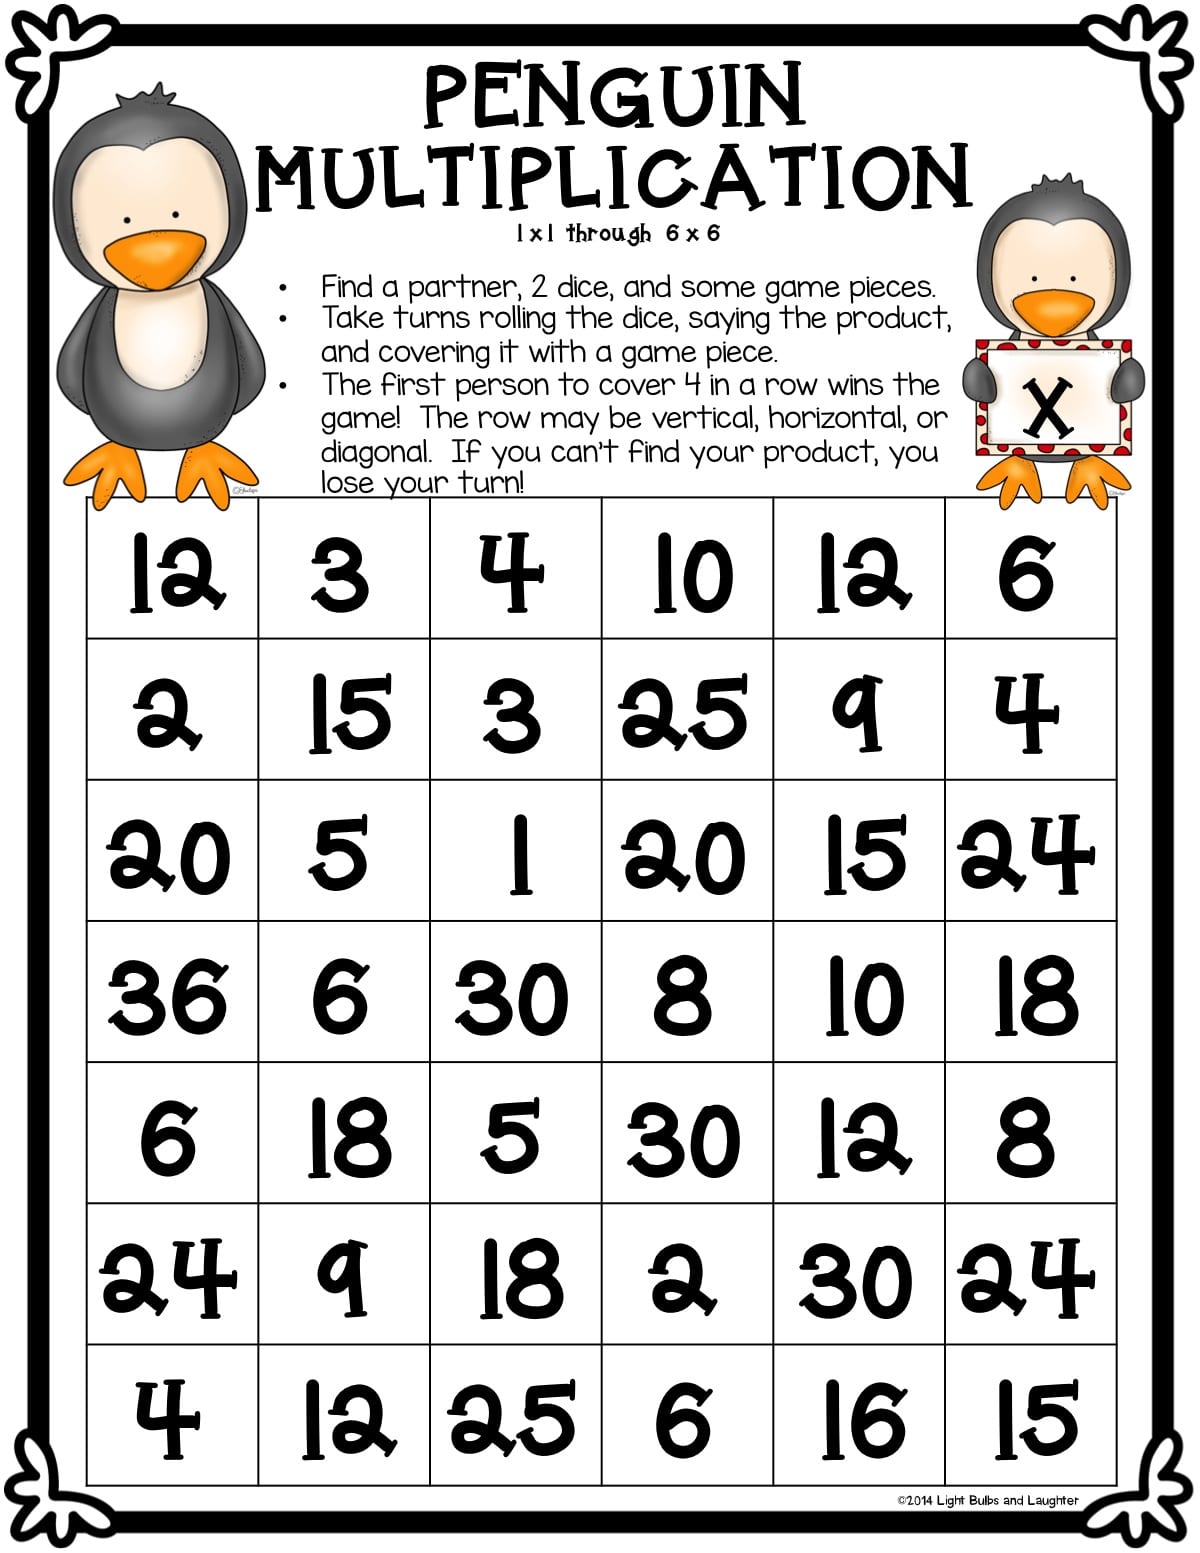 a worksheet entitled penguin multiplication with numbers in a grid, instructions for the activity and two cartoon penguins